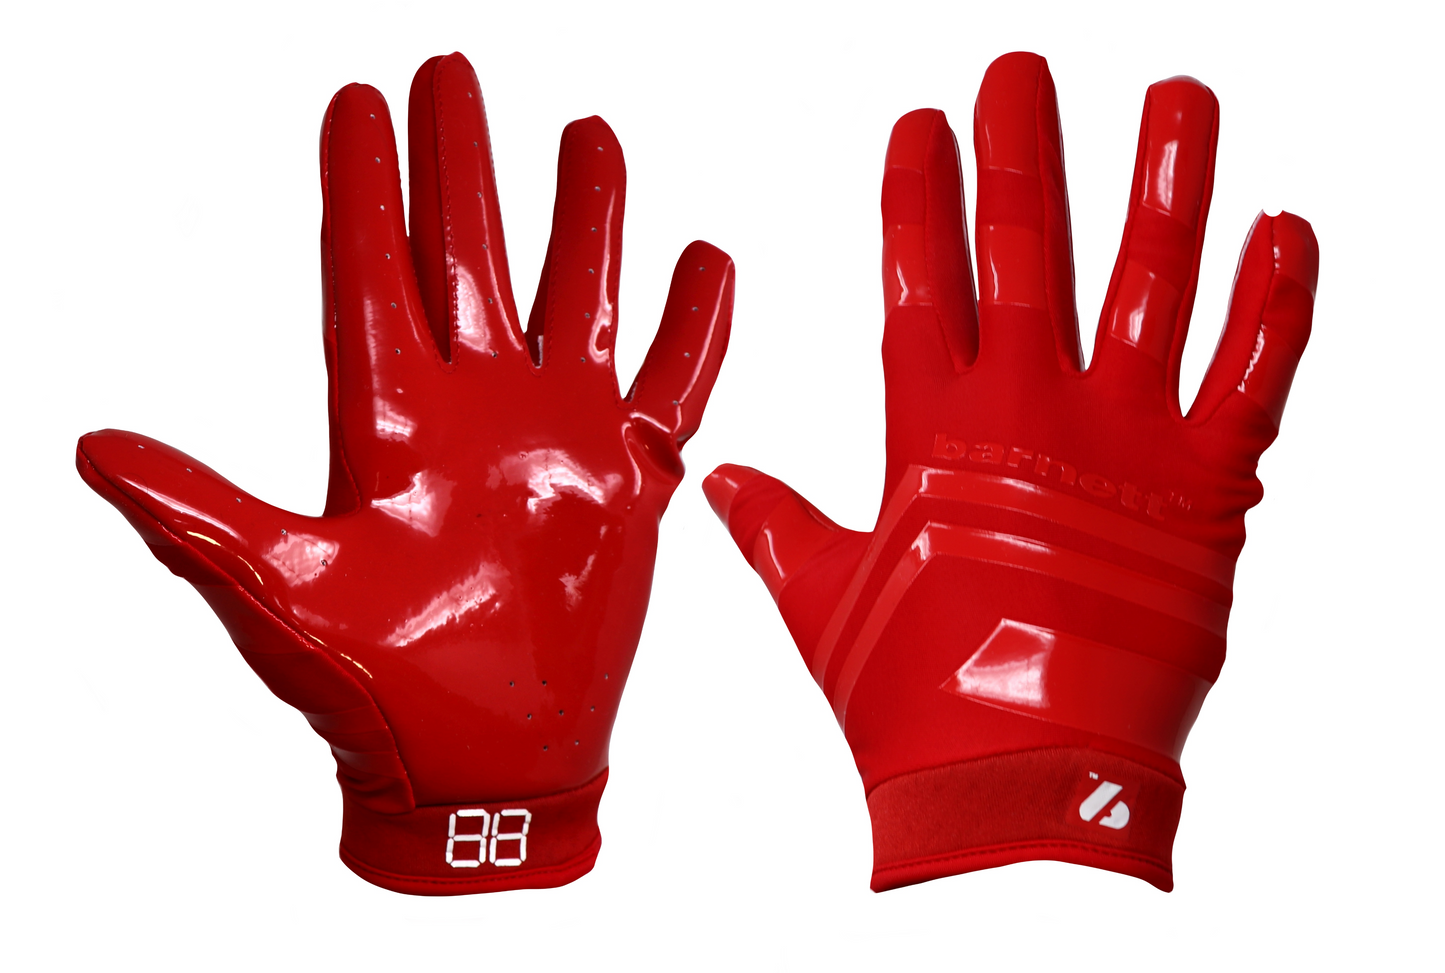 FRG-03 The best receiver football gloves, RE,DB,RB, Red